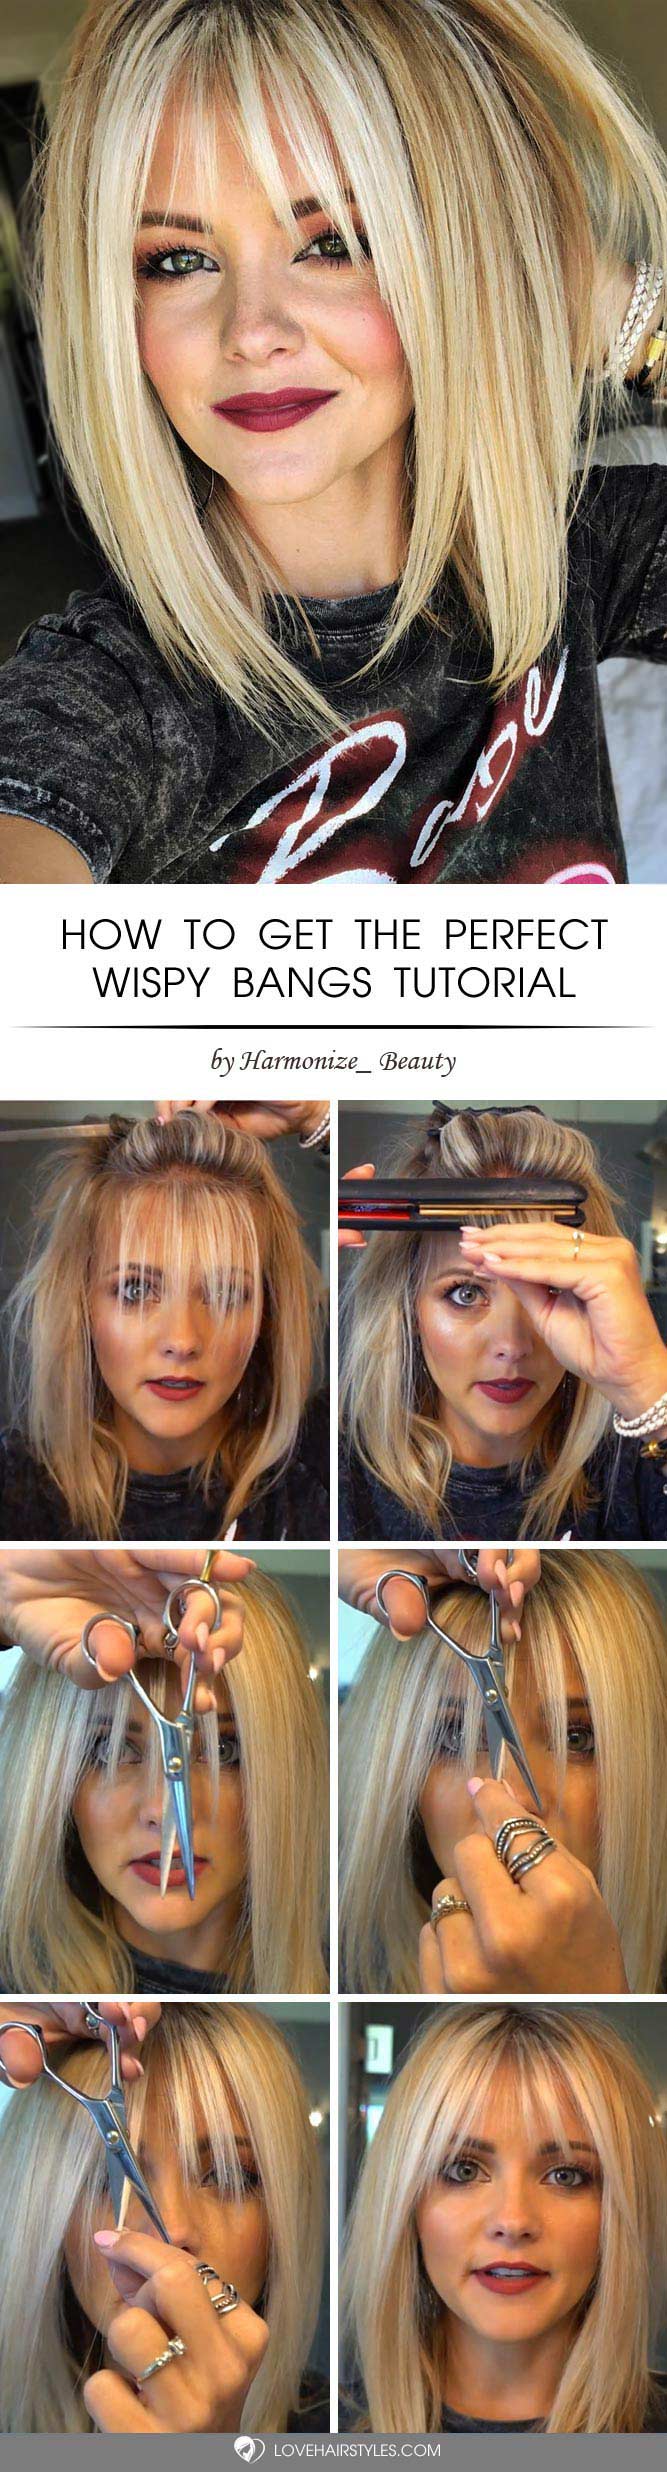 How To Get The Perfect Wispy Bangs #howtocutbangs #bangs #tutorials